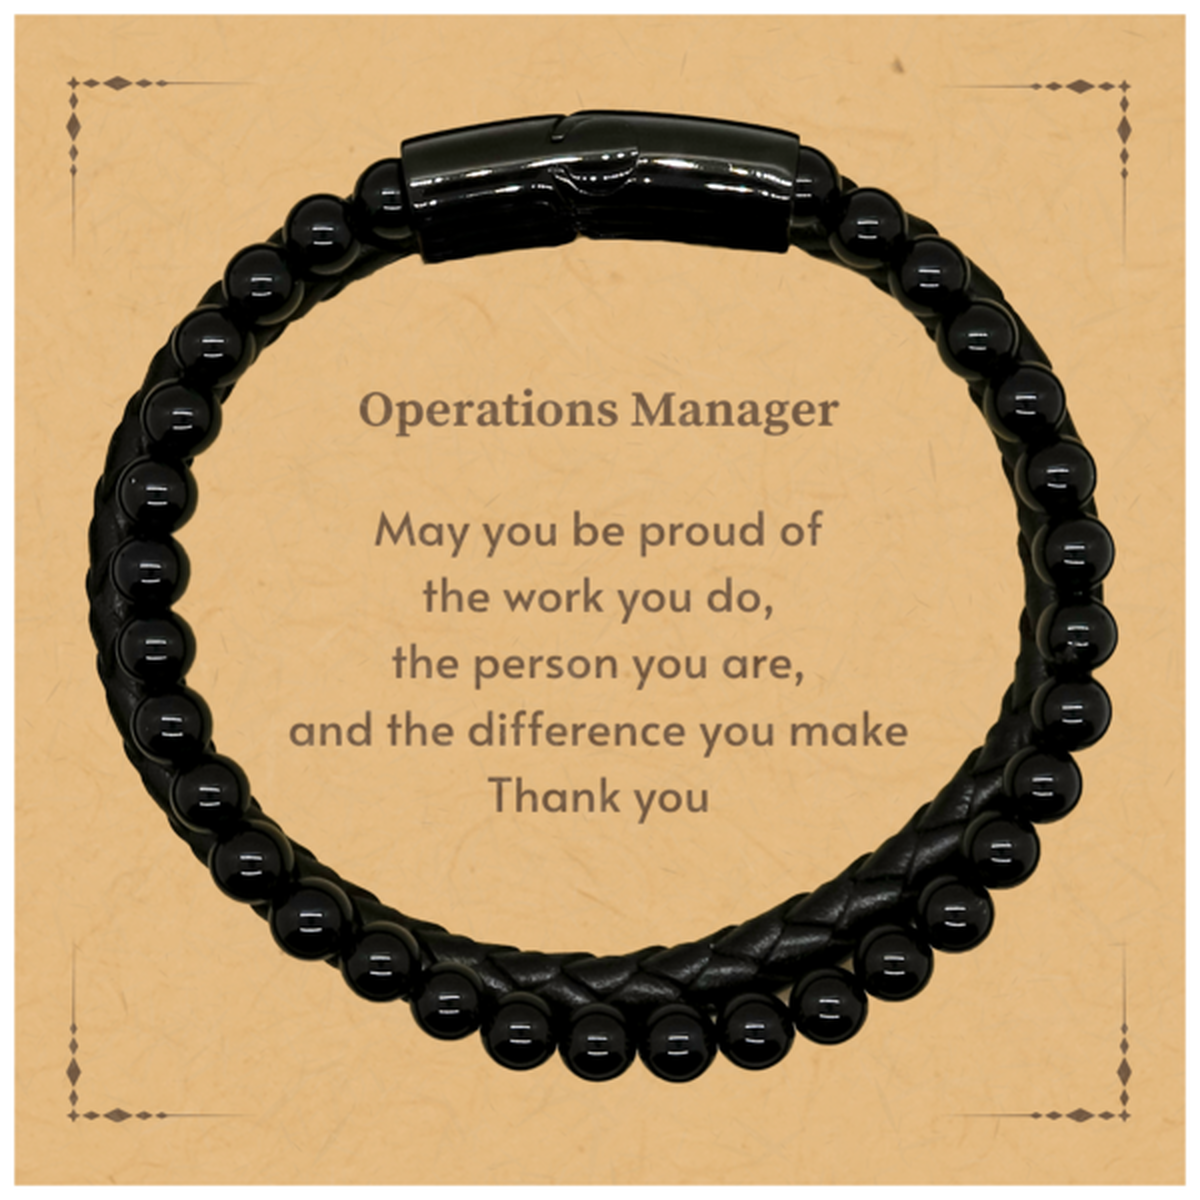 Heartwarming Stone Leather Bracelets Retirement Coworkers Gifts for Operations Manager, Operations Manager May You be proud of the work you do, the person you are Gifts for Boss Men Women Friends